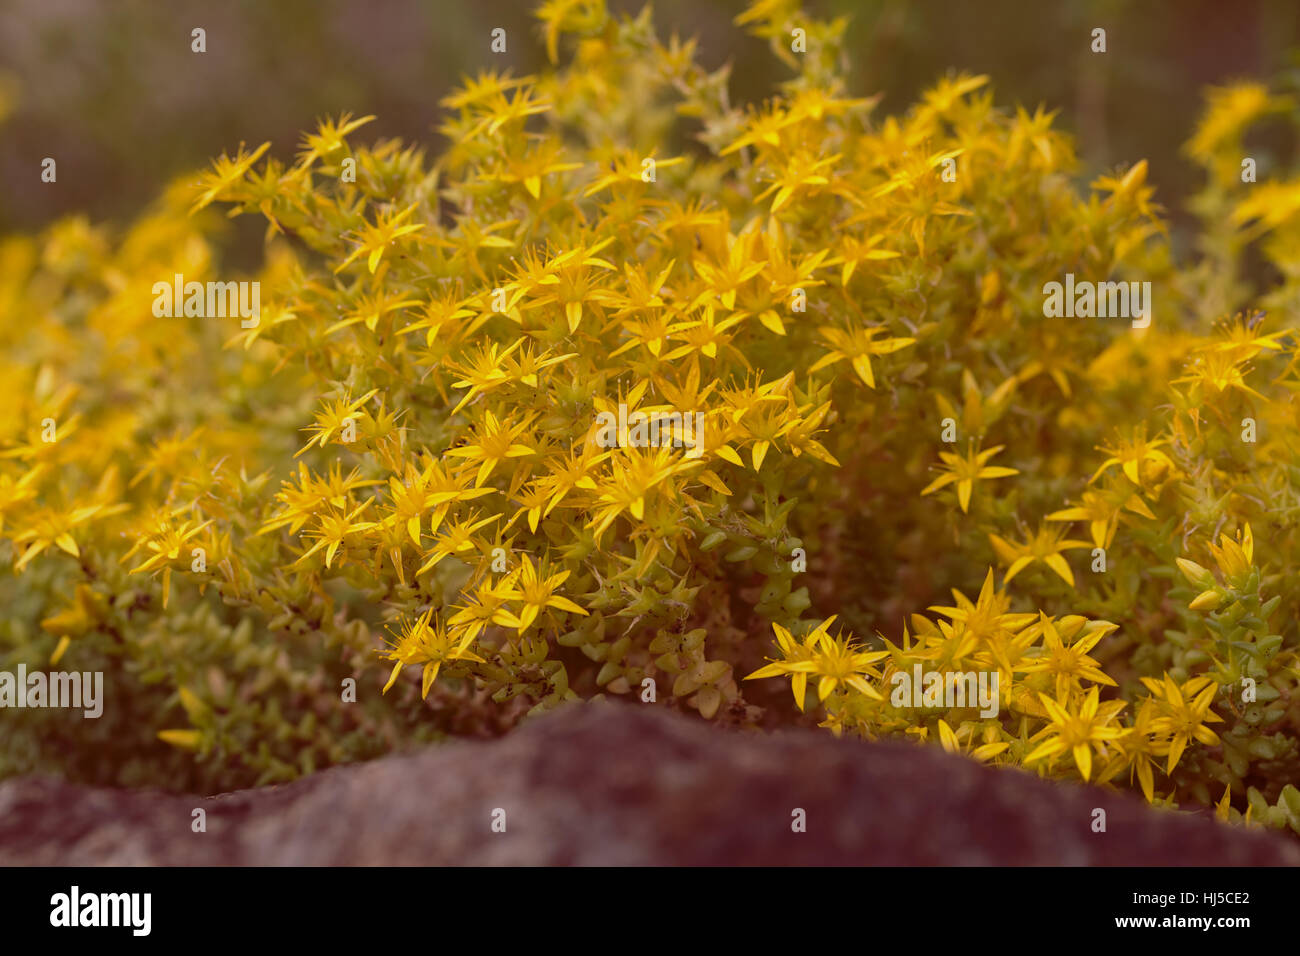 yellow stonecrop on the stone in nature, note shallow depth of field Stock Photo